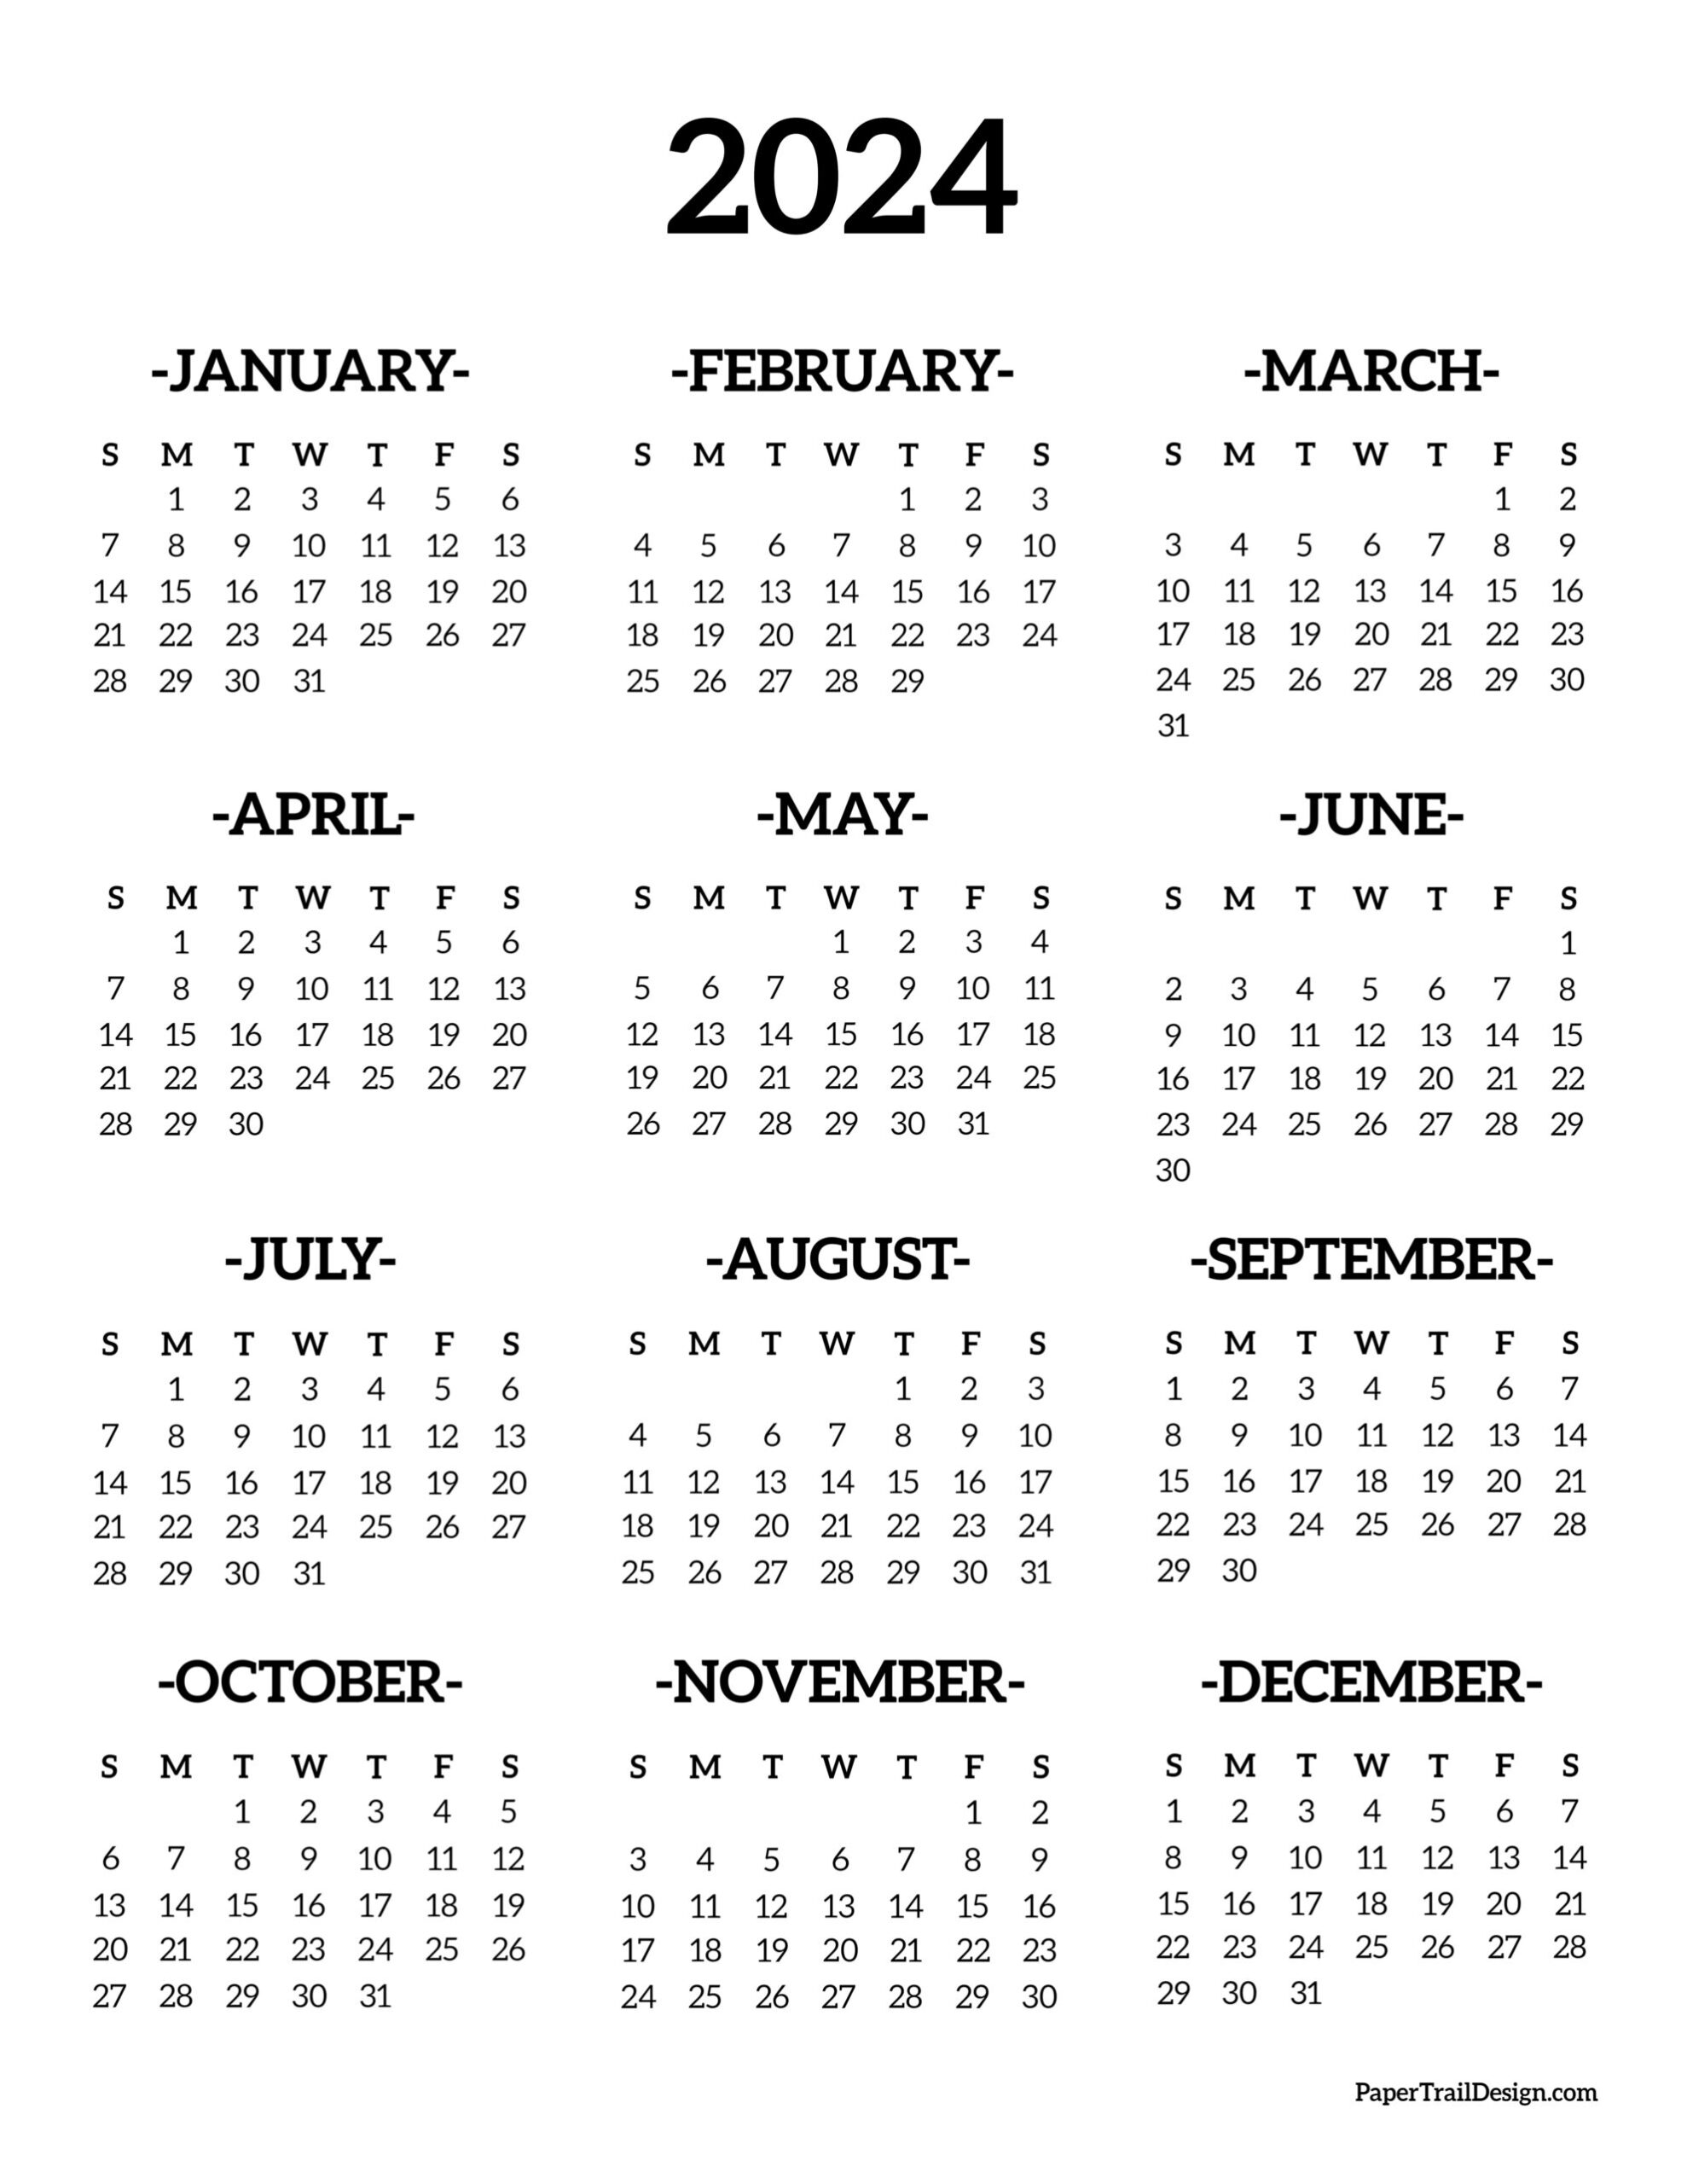 Calendar 2024 Printable One Page - Paper Trail Design for Best Free Printable Calendar 2024